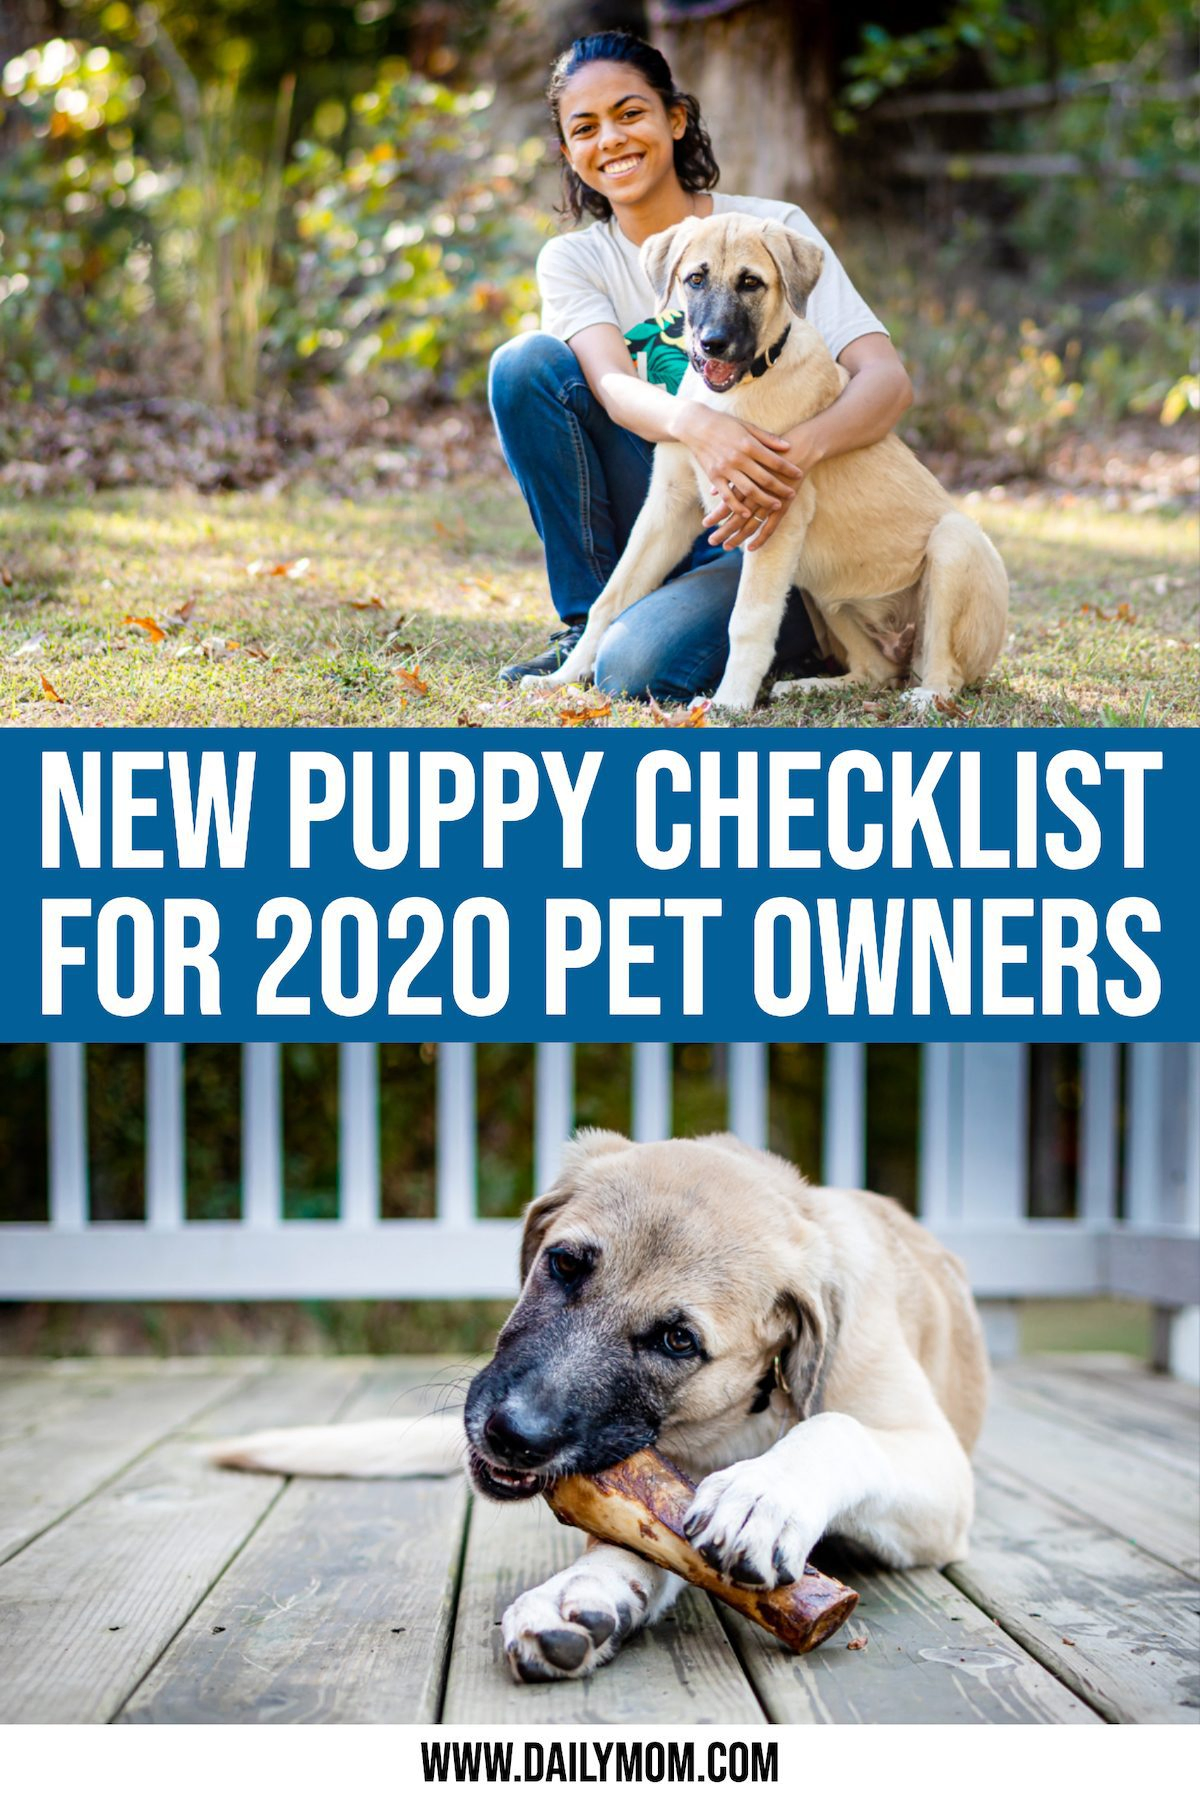 daily-mom-parent-portal-New Puppy Checklist: Ultimate Round-up Guide